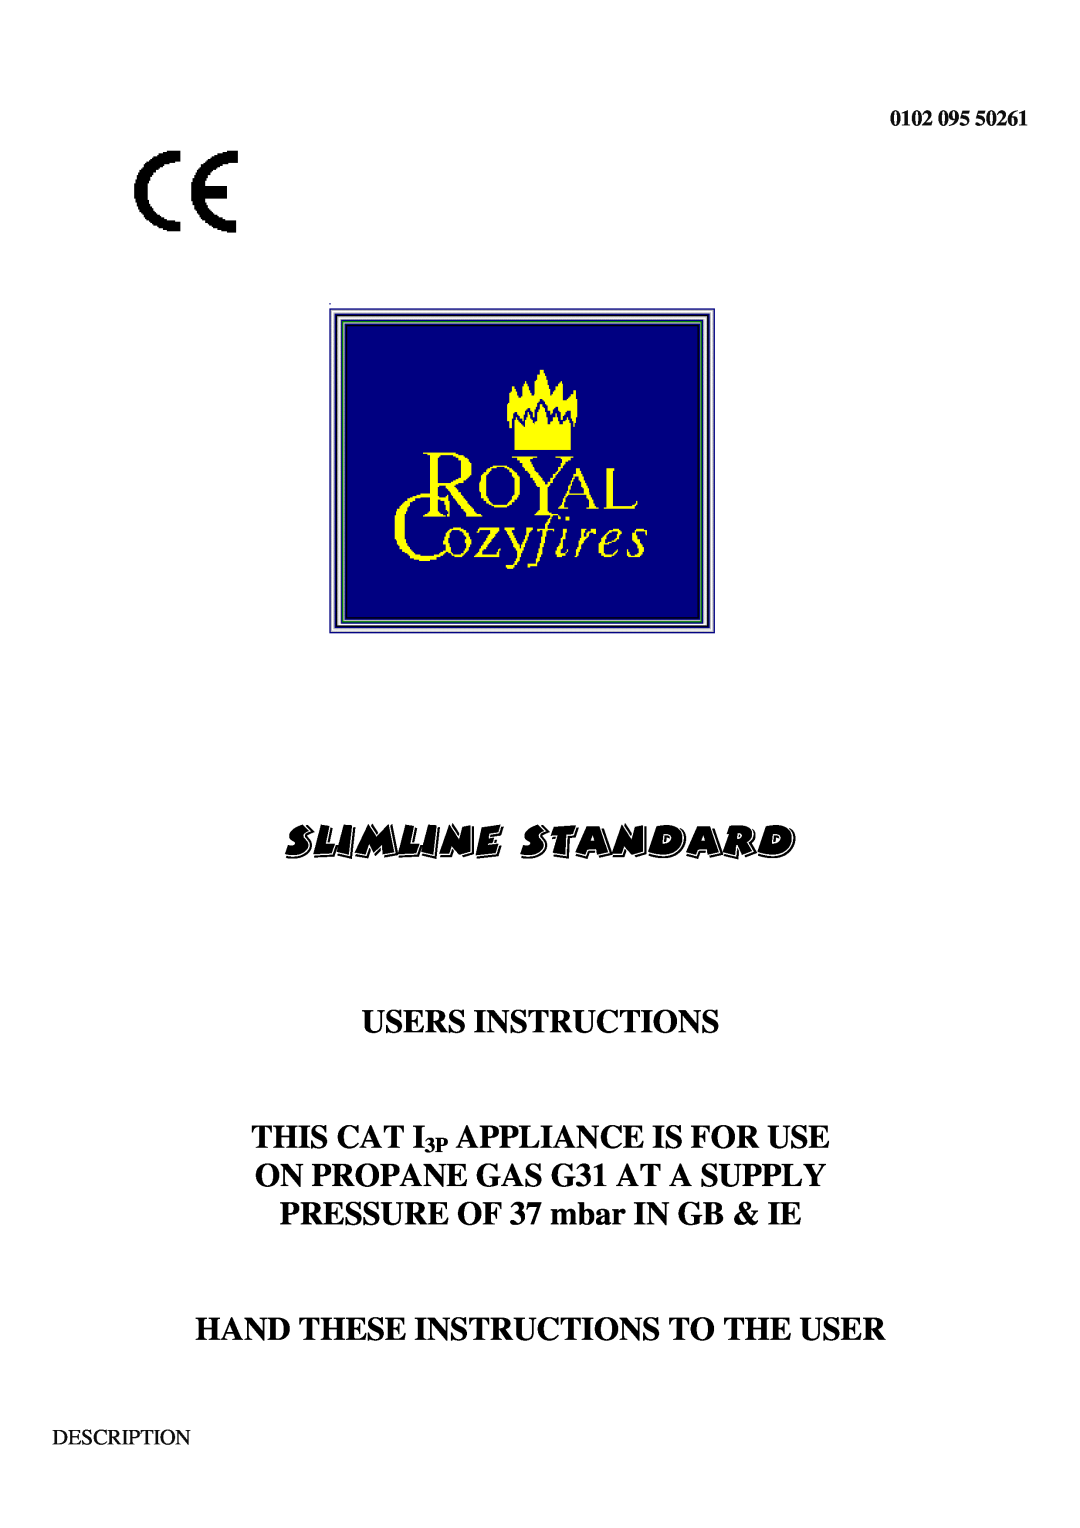 Royal Consumer Information Products G31 manual 6/,0/,167$1$5, Users Instructions, Hand These Instructions To The User 